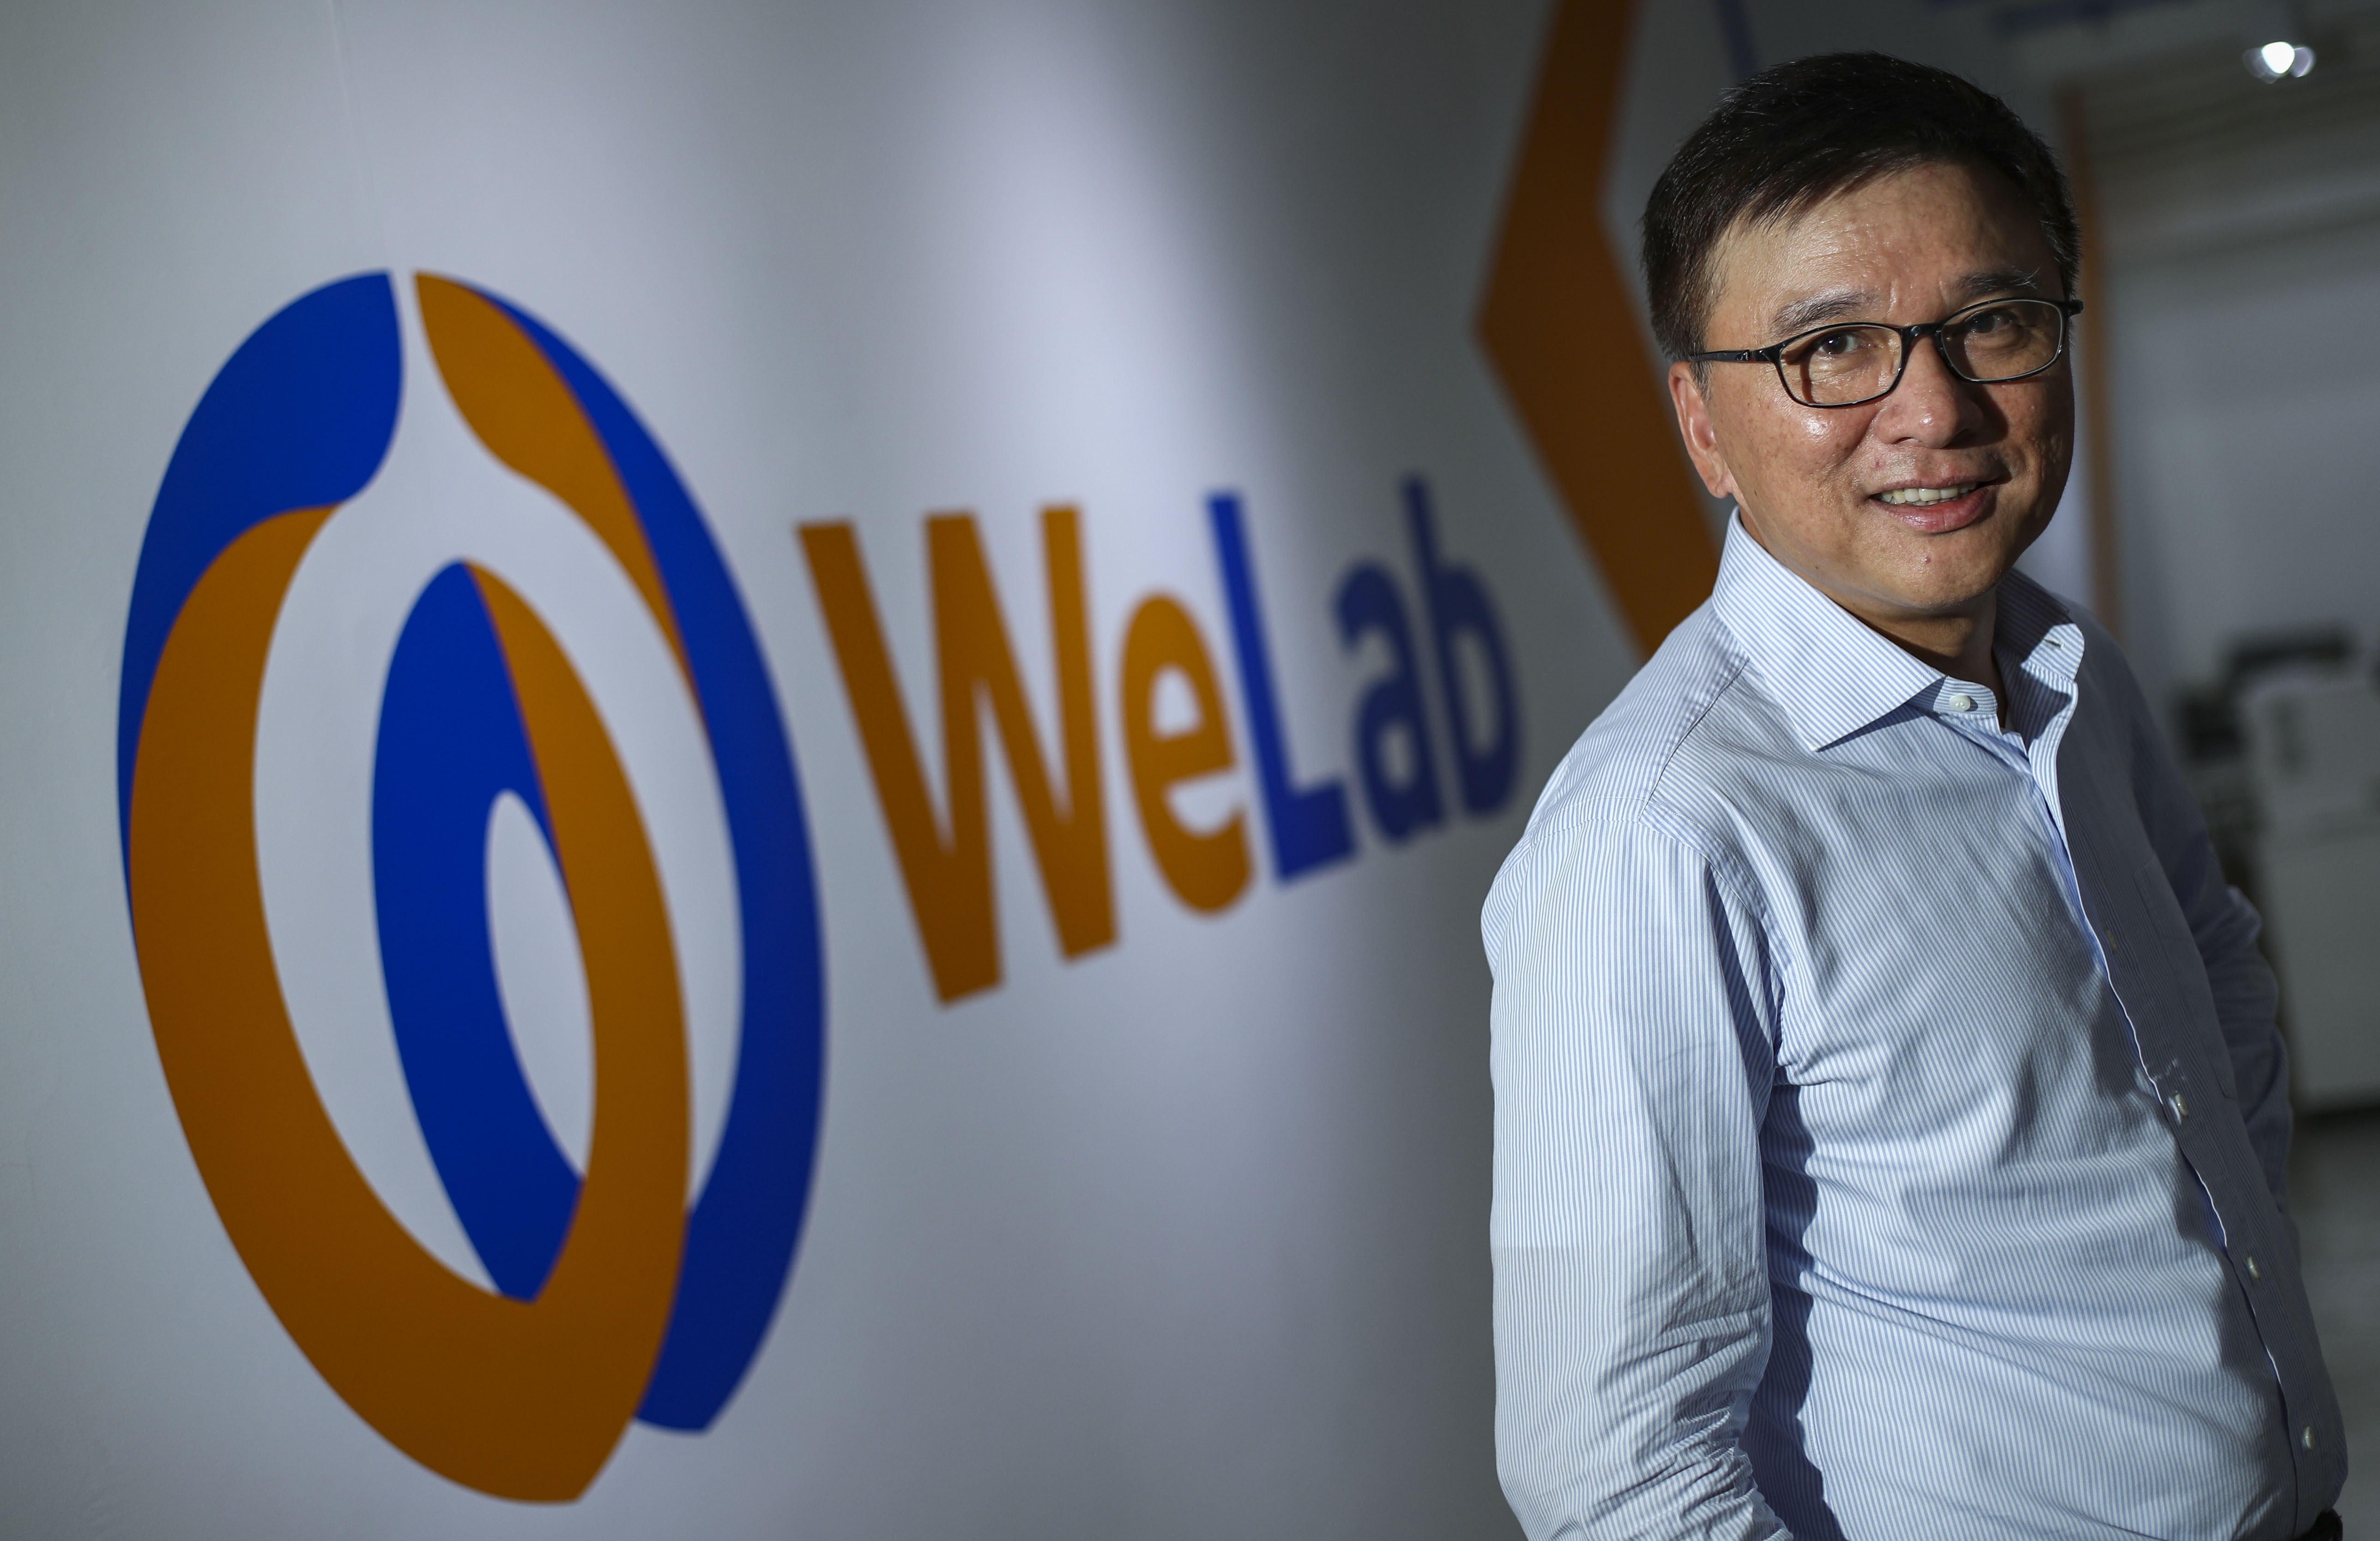 Chan Ka-keung, senior adviser of WeLab and former Secretary for Financial Services and the Treasury, will become the new chairman of WeLab Digital virtual bank. Photo: Nora Tam